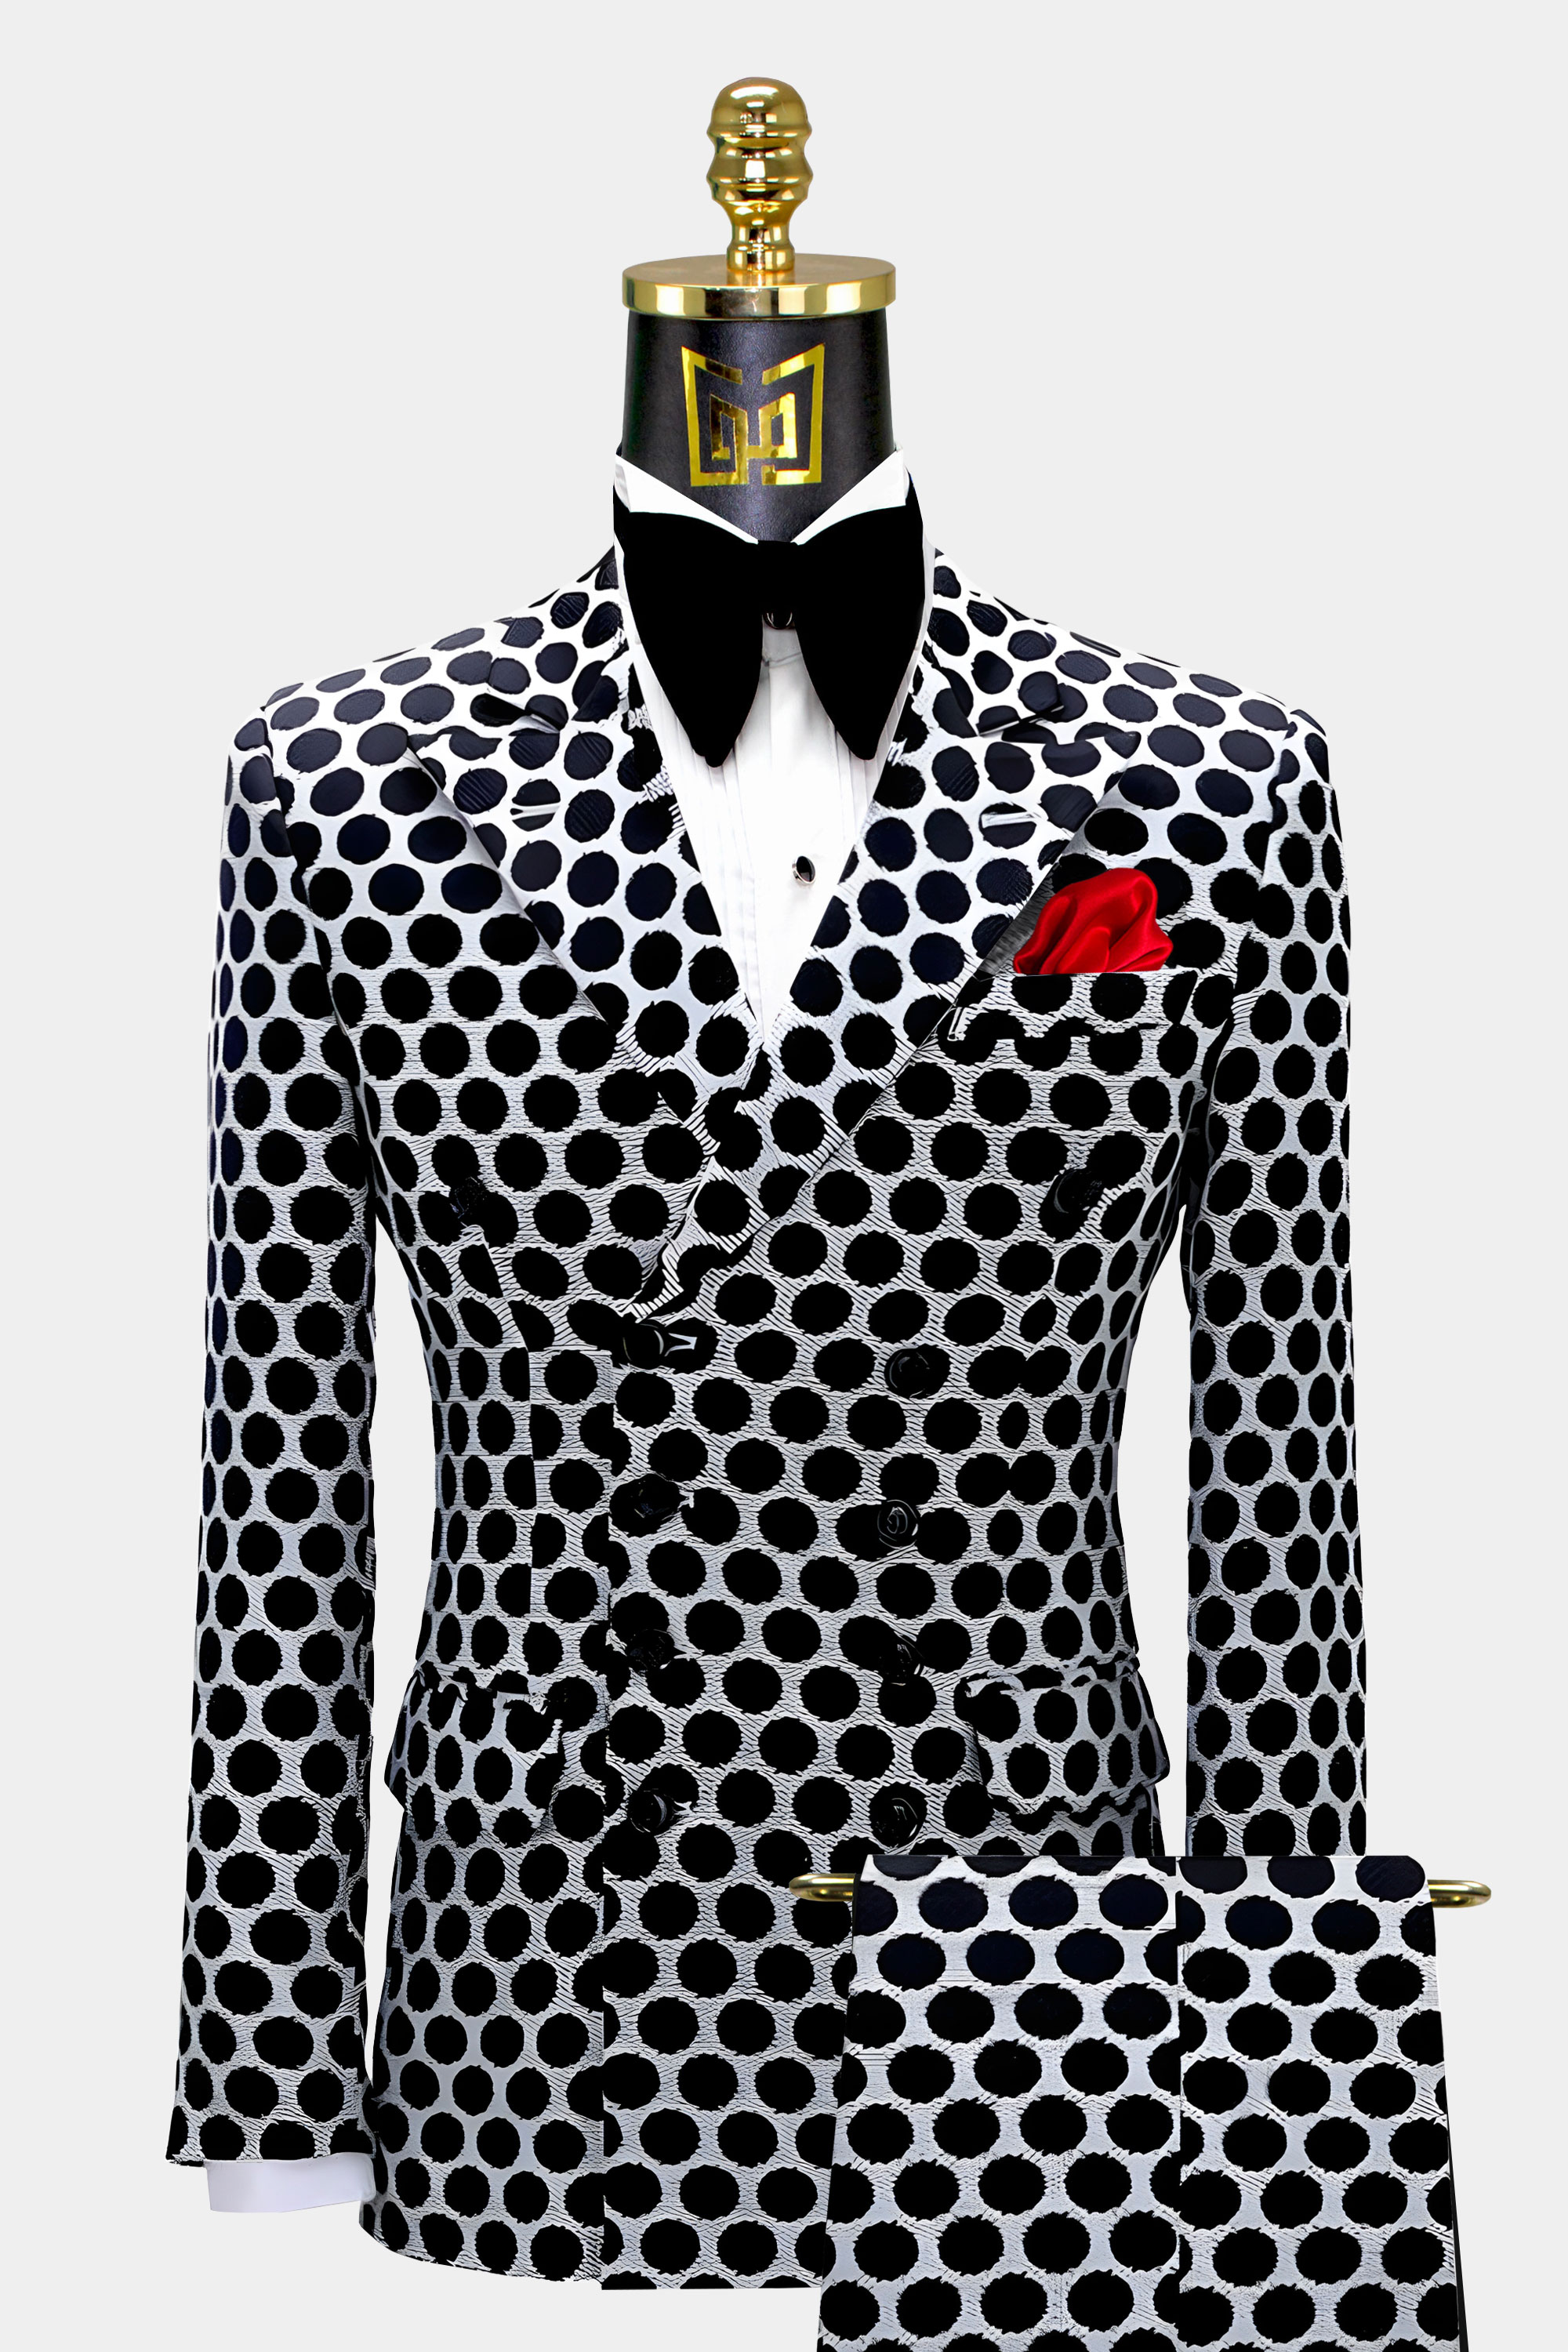 Double Breasted Black & White Polka Dot Suit - 3 Piece